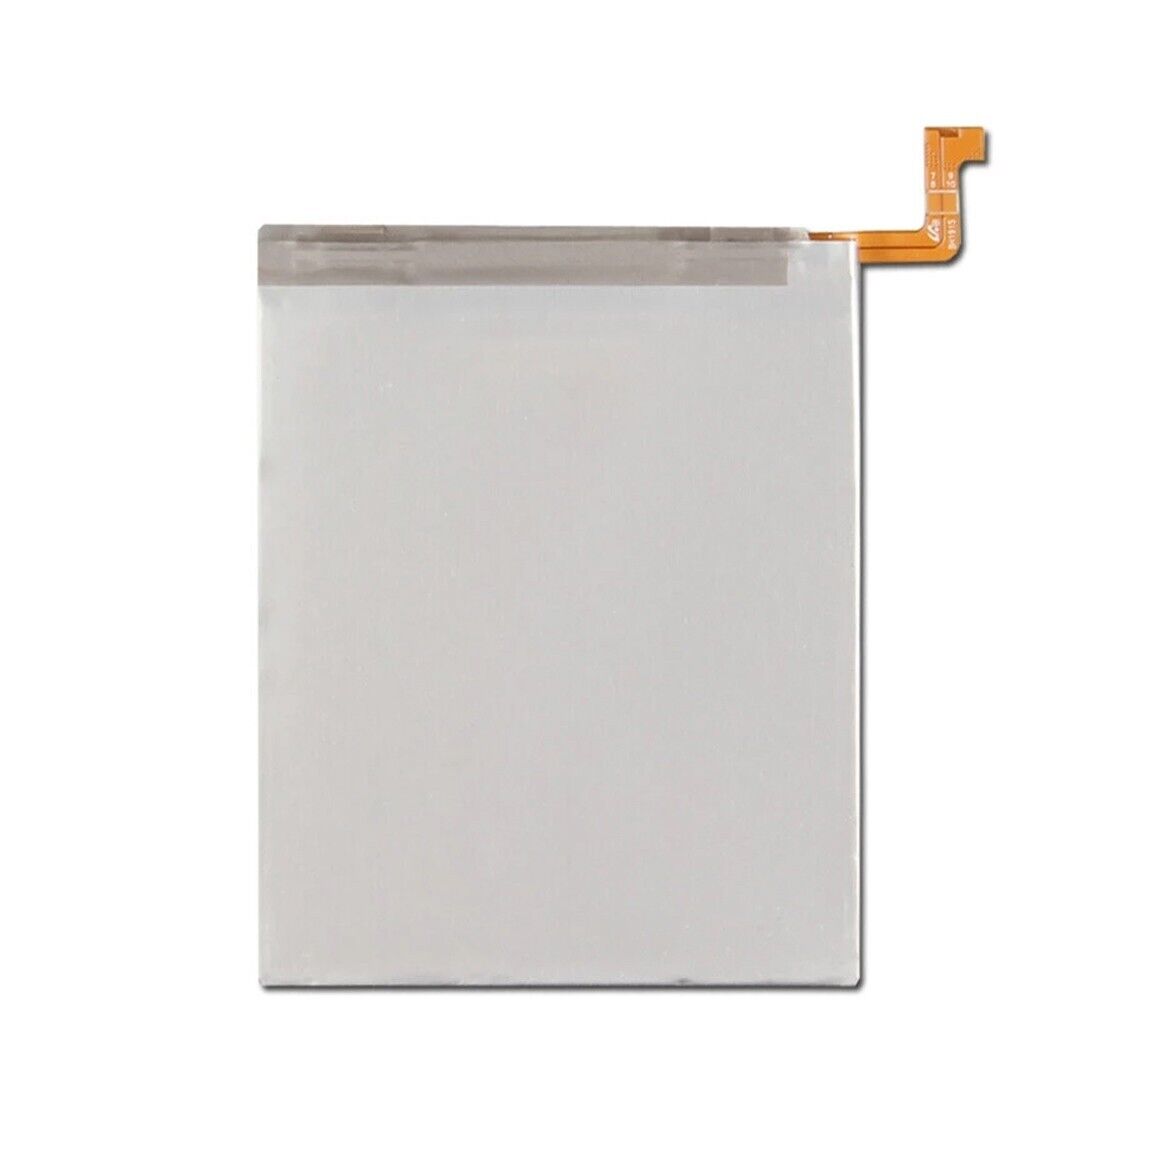 Replacement Battery For Samsung Galaxy Note 10 Plus | EB-BN972ABU